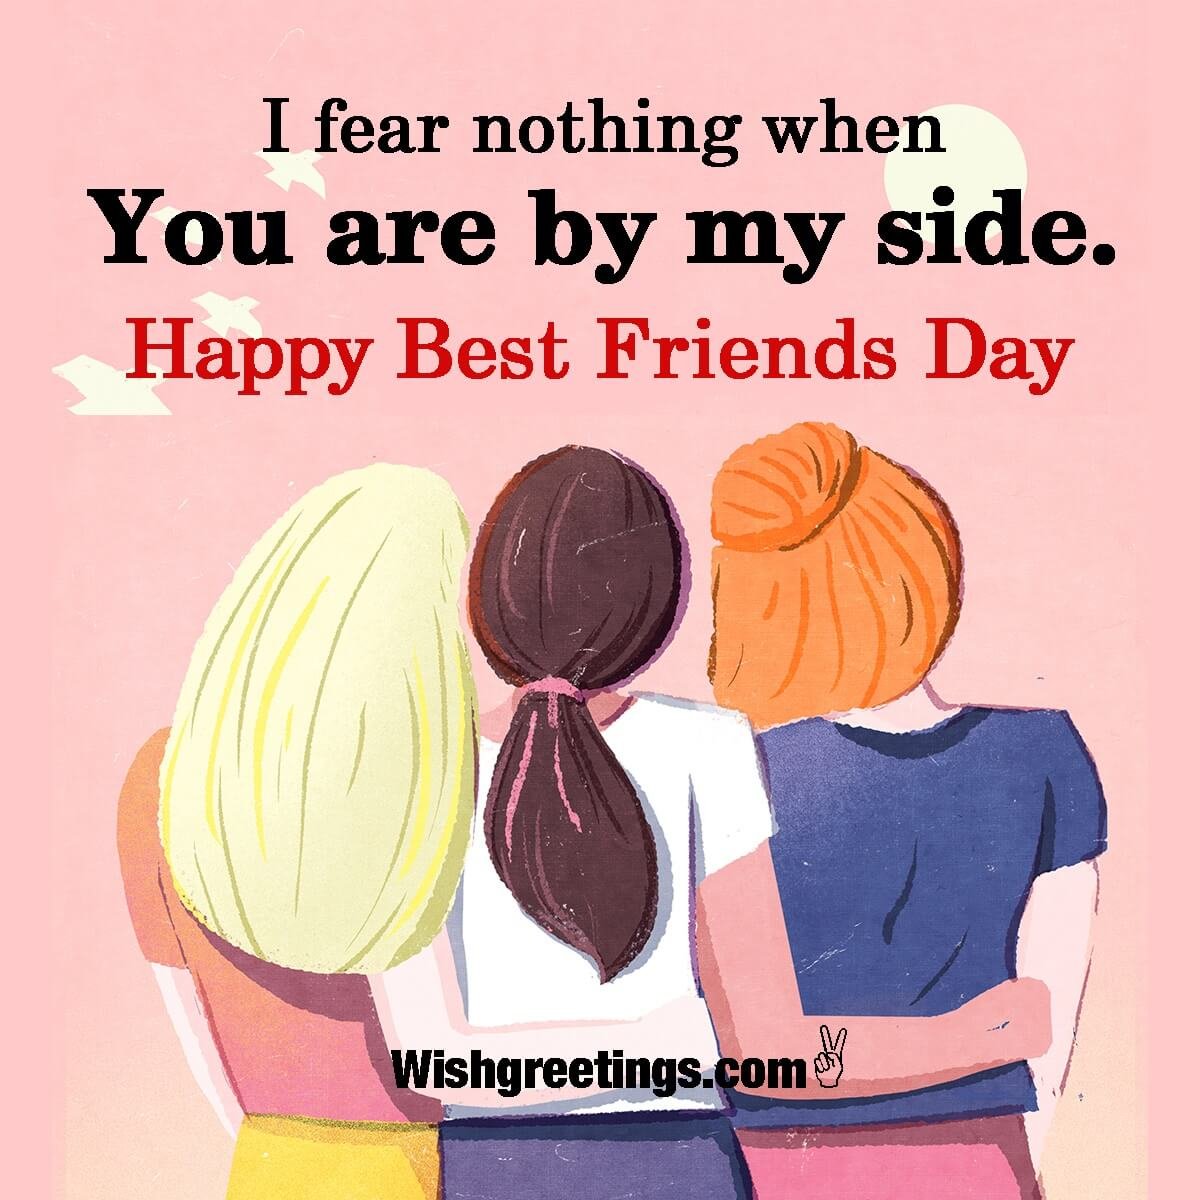 Those that the day my friend. Хэппи Дэй френдс. Happy Friendship Day. Best friends Day. Картина friends Day.